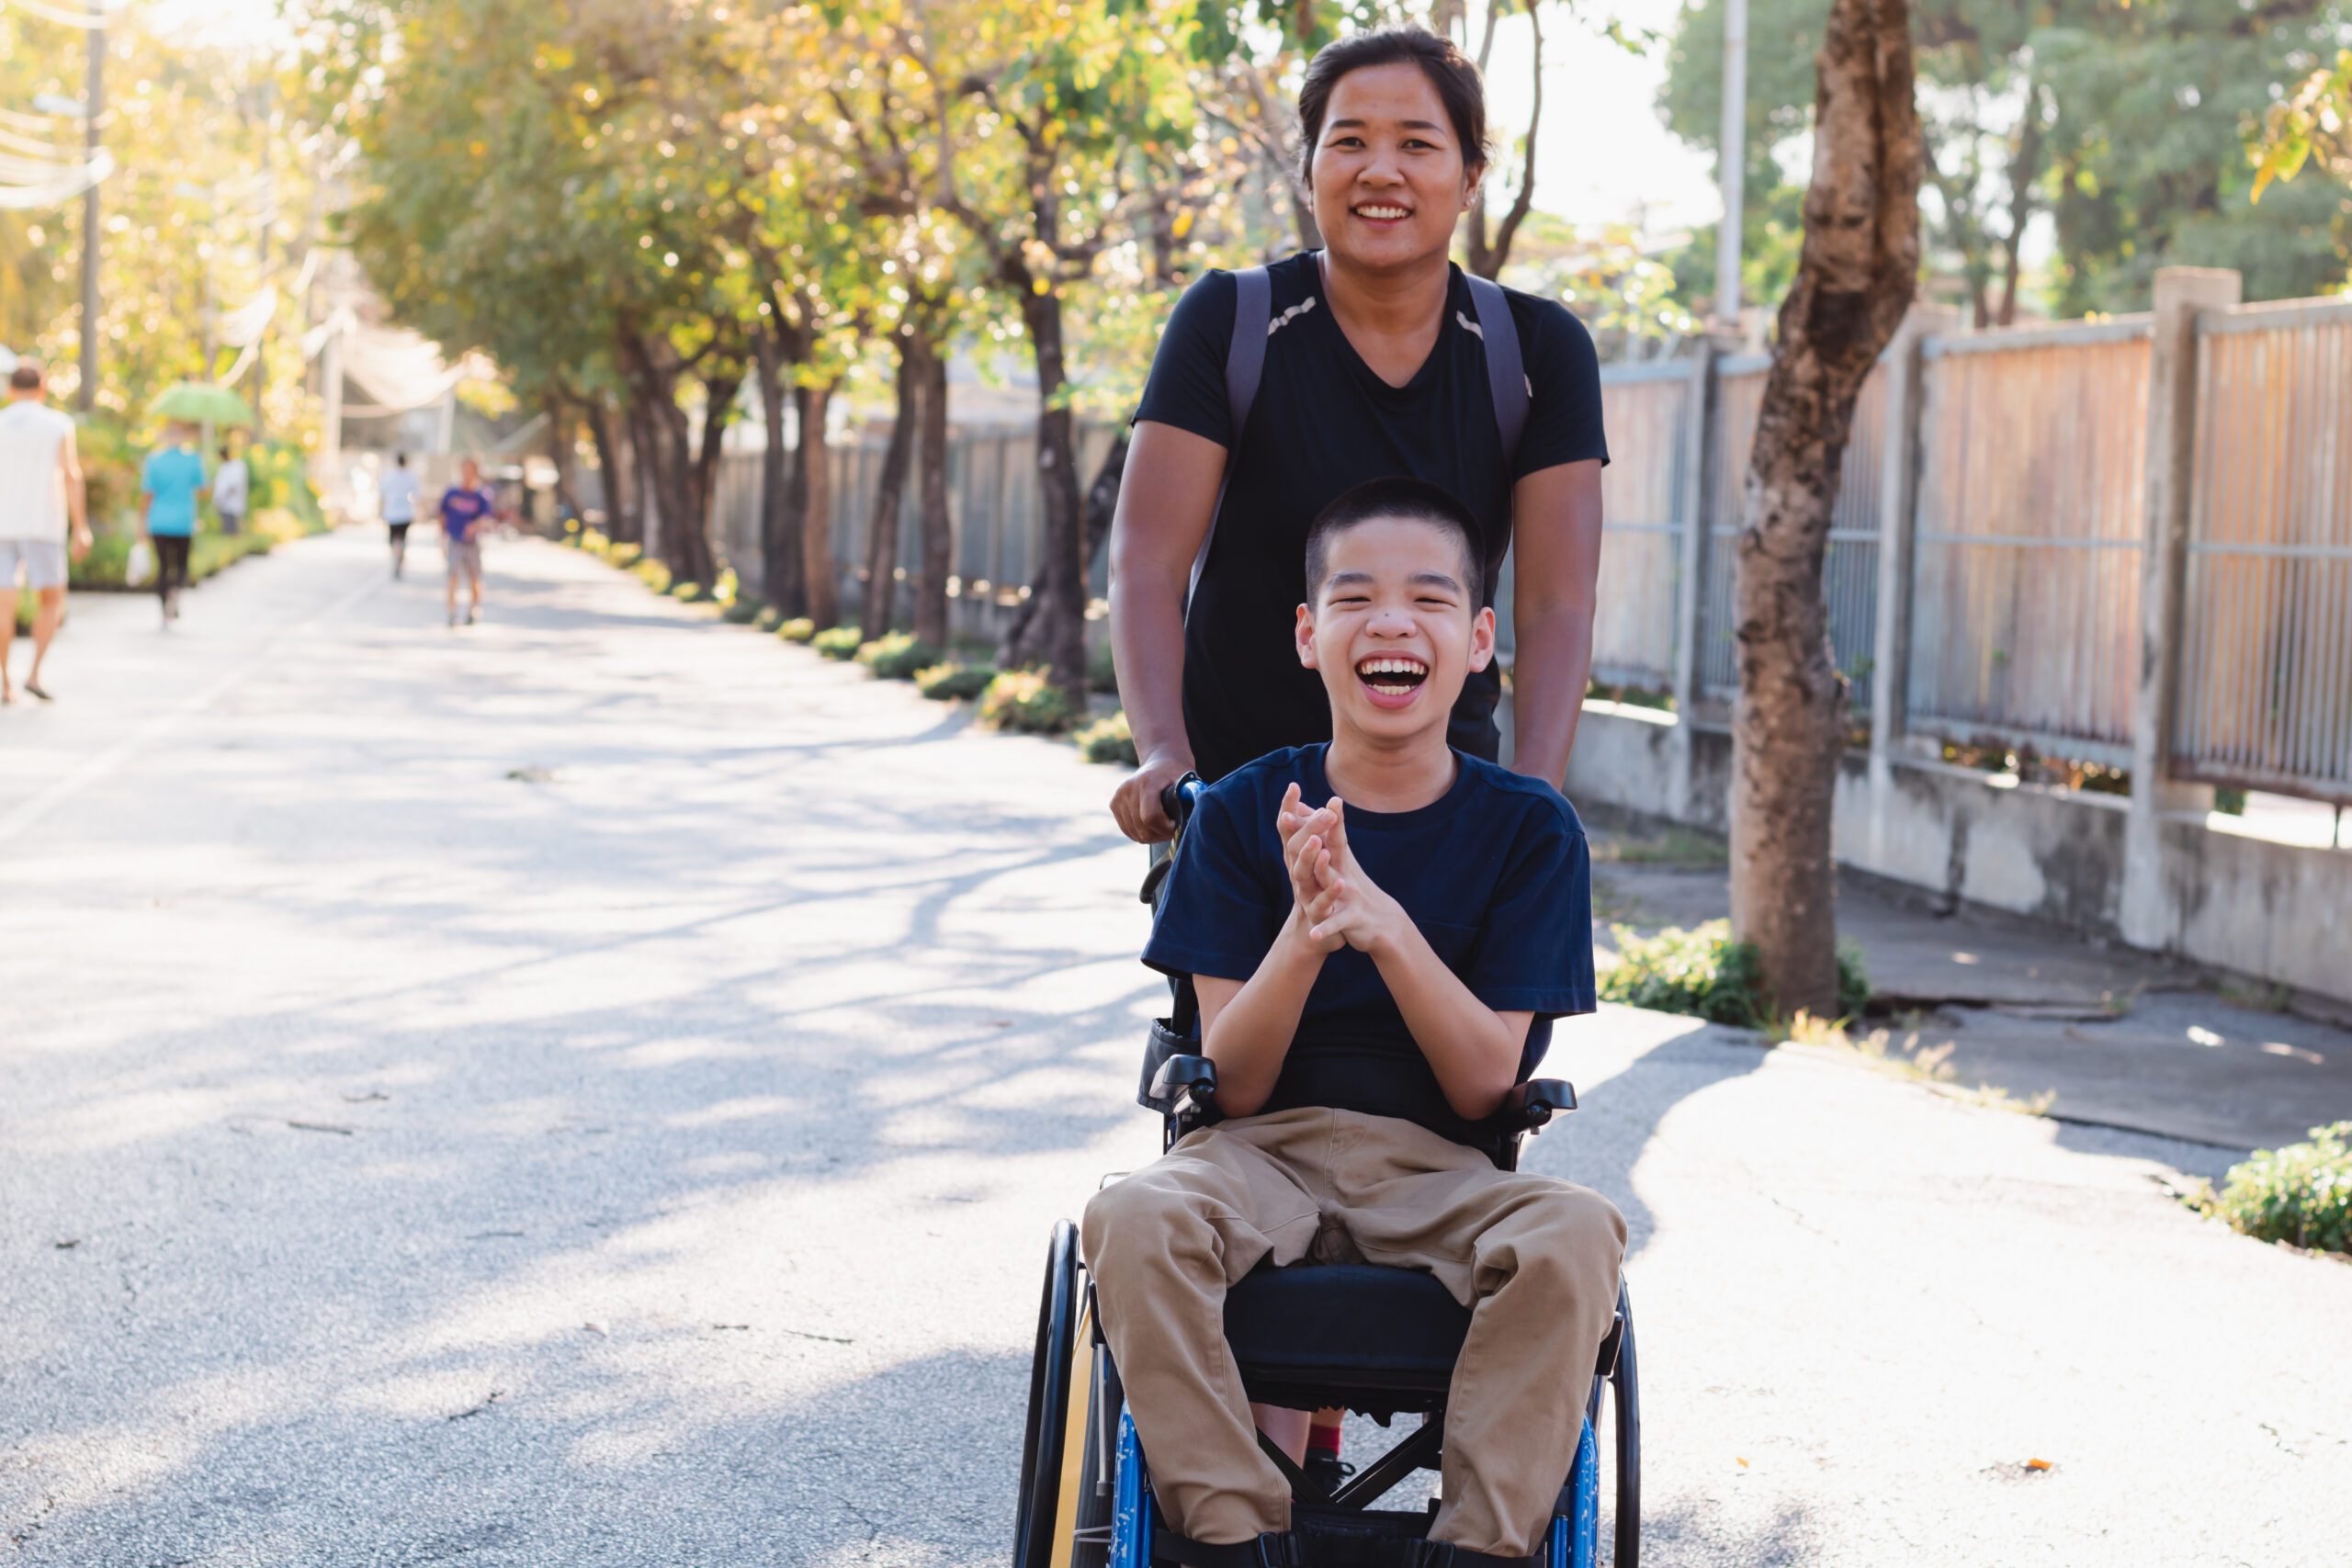 young boy in wheelchair smiling